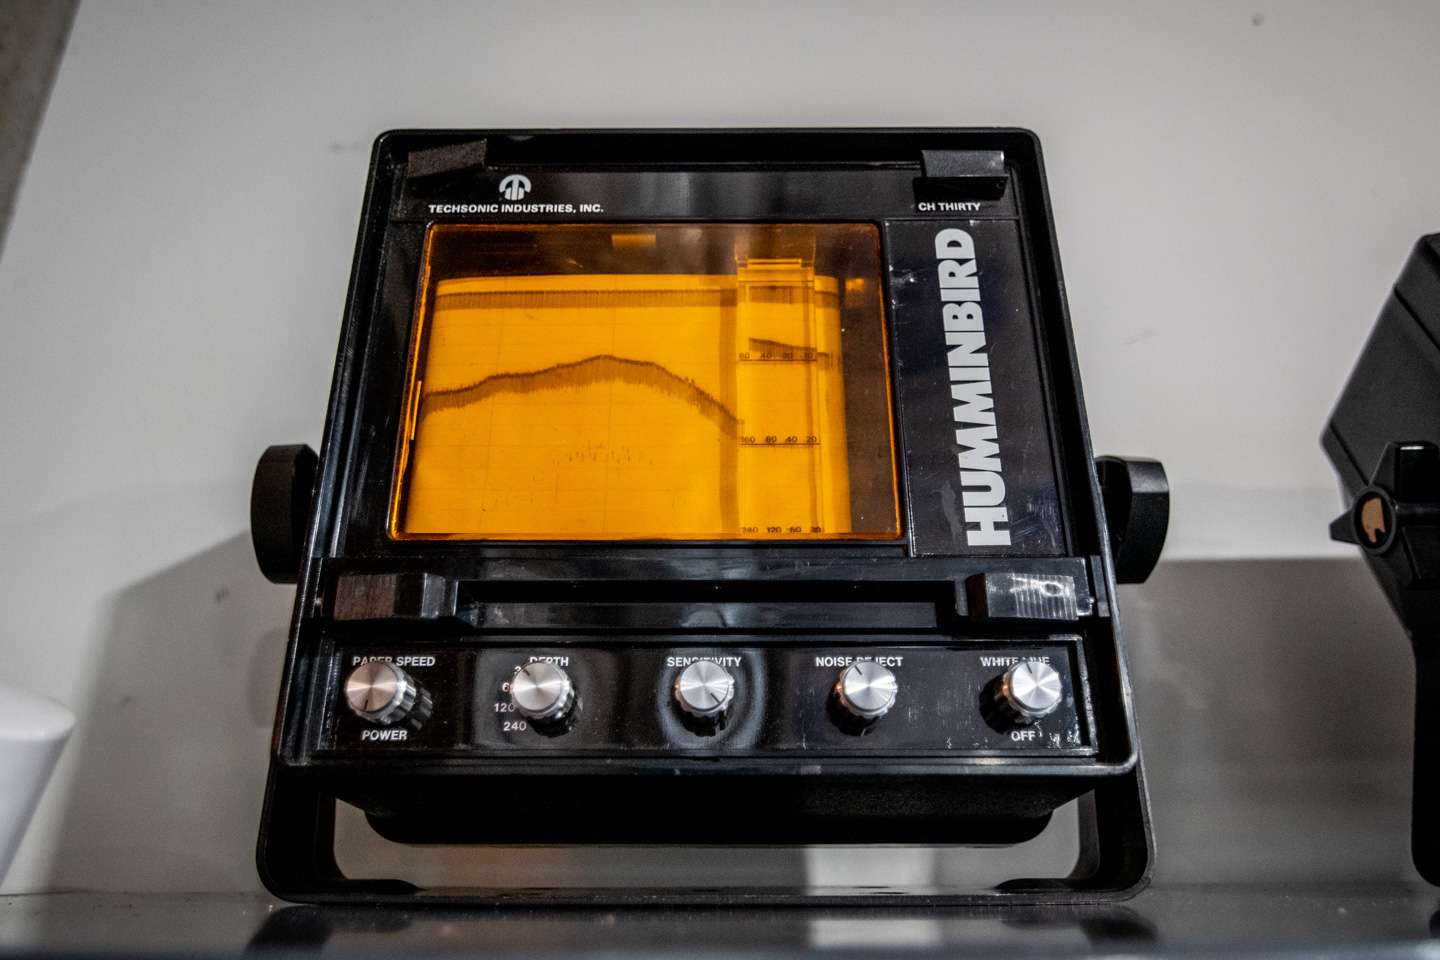 The Humminbird CH Thirty was a paper graph recorder popular in the mid-1980s. 